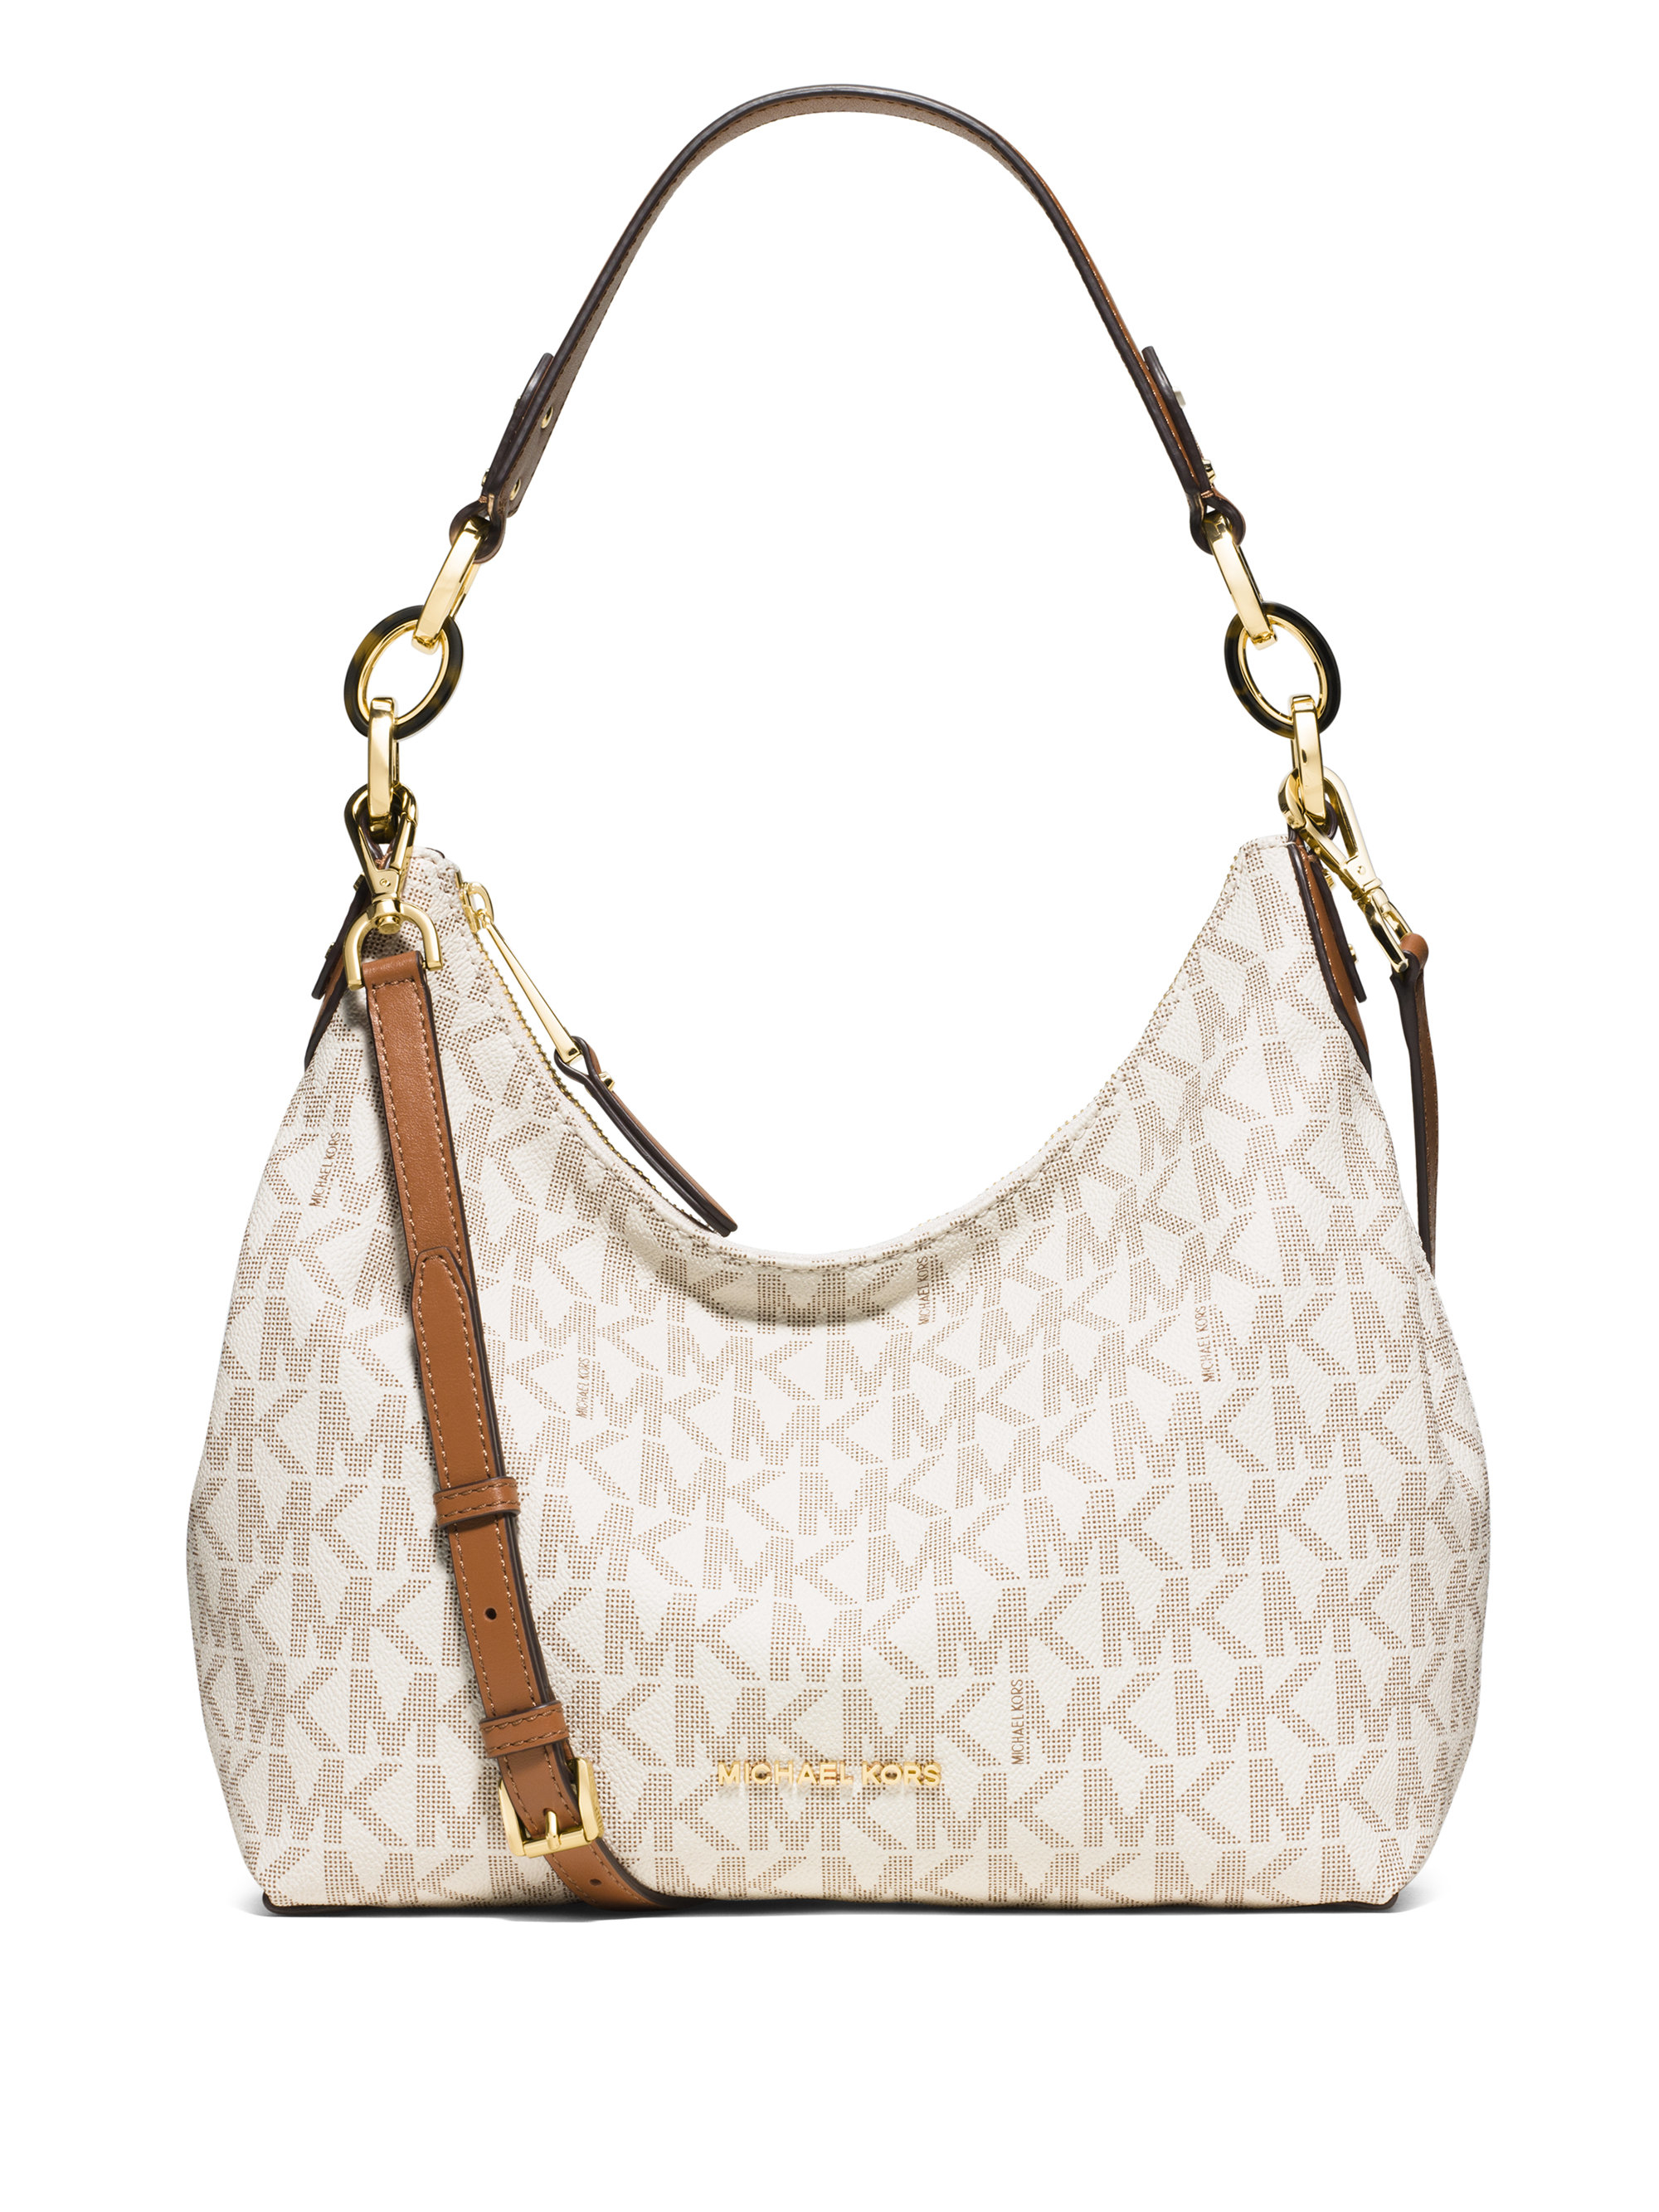 Voordracht Spin stapel MICHAEL Michael Kors Signature Print Leather Hobo Bag in White | Lyst